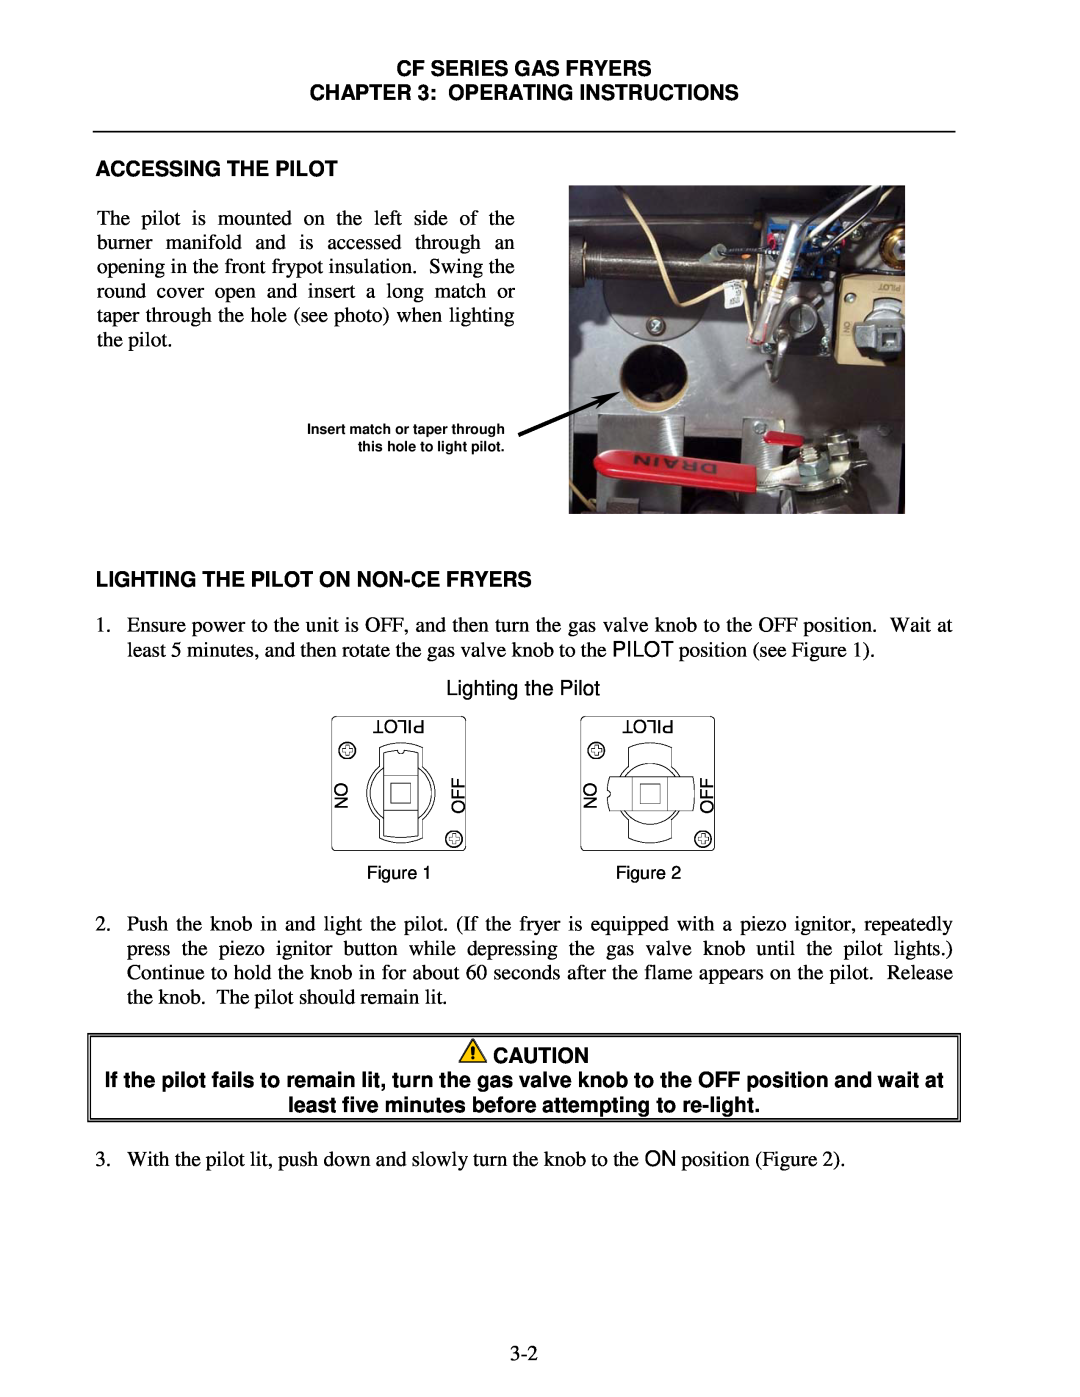 Frymaster CF Series Cf Series Gas Fryers Operating Instructions, Accessing The Pilot, Lighting The Pilot On Non-Ce Fryers 